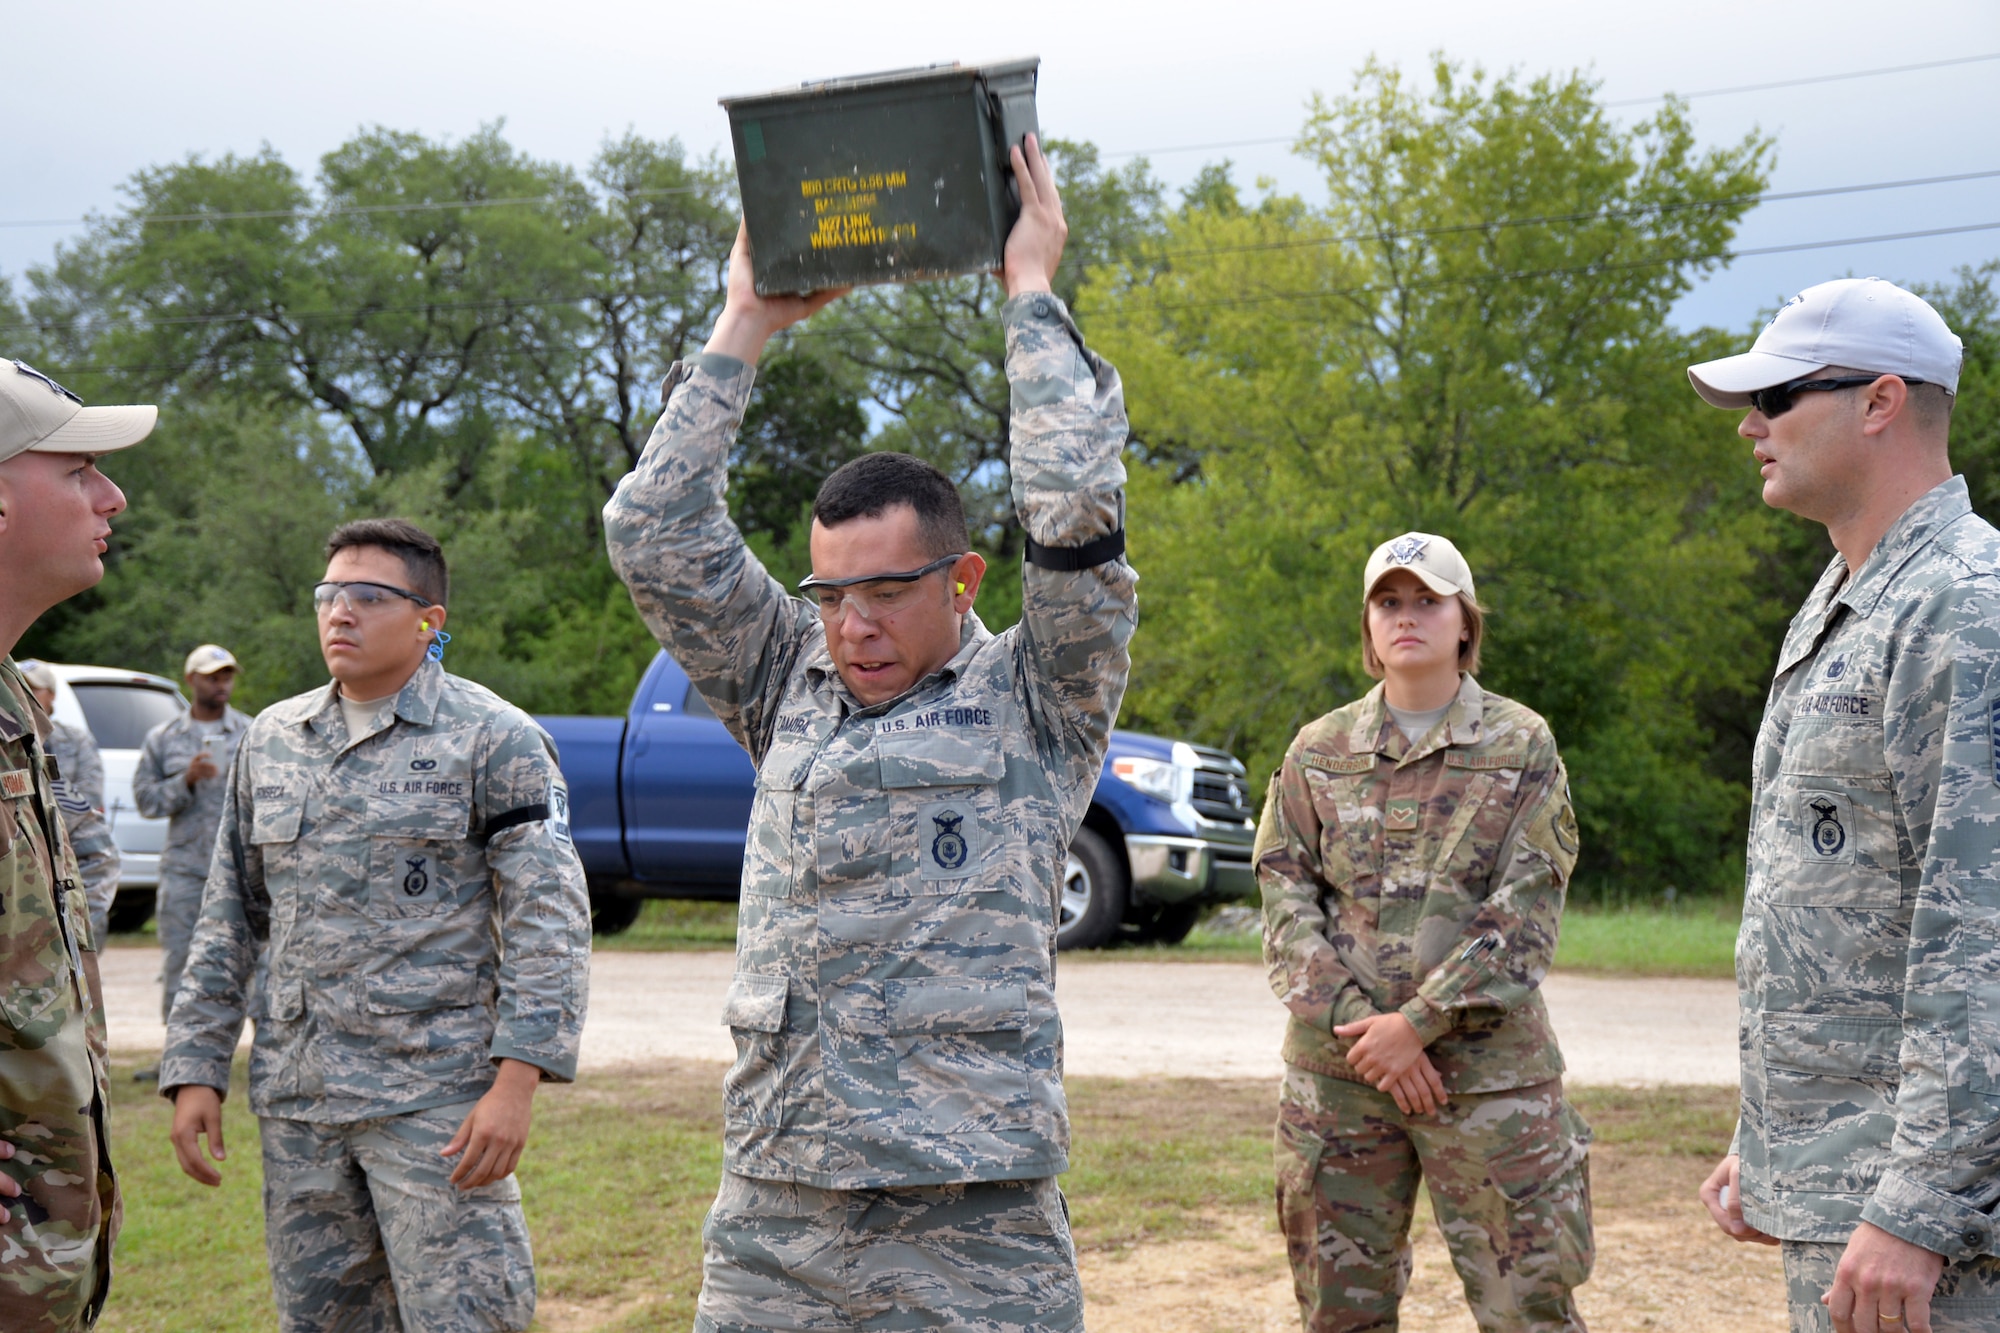 Tech Sgt. Hector Zamora, Air Force Reserve Command Defender Challenge team leader, performs 25 repetitions of lifting the ammo can as the first portion of his relay in the combat endurance event Sept. 13, 2018 at Camp Bullis Military Training Reservation, Texas.